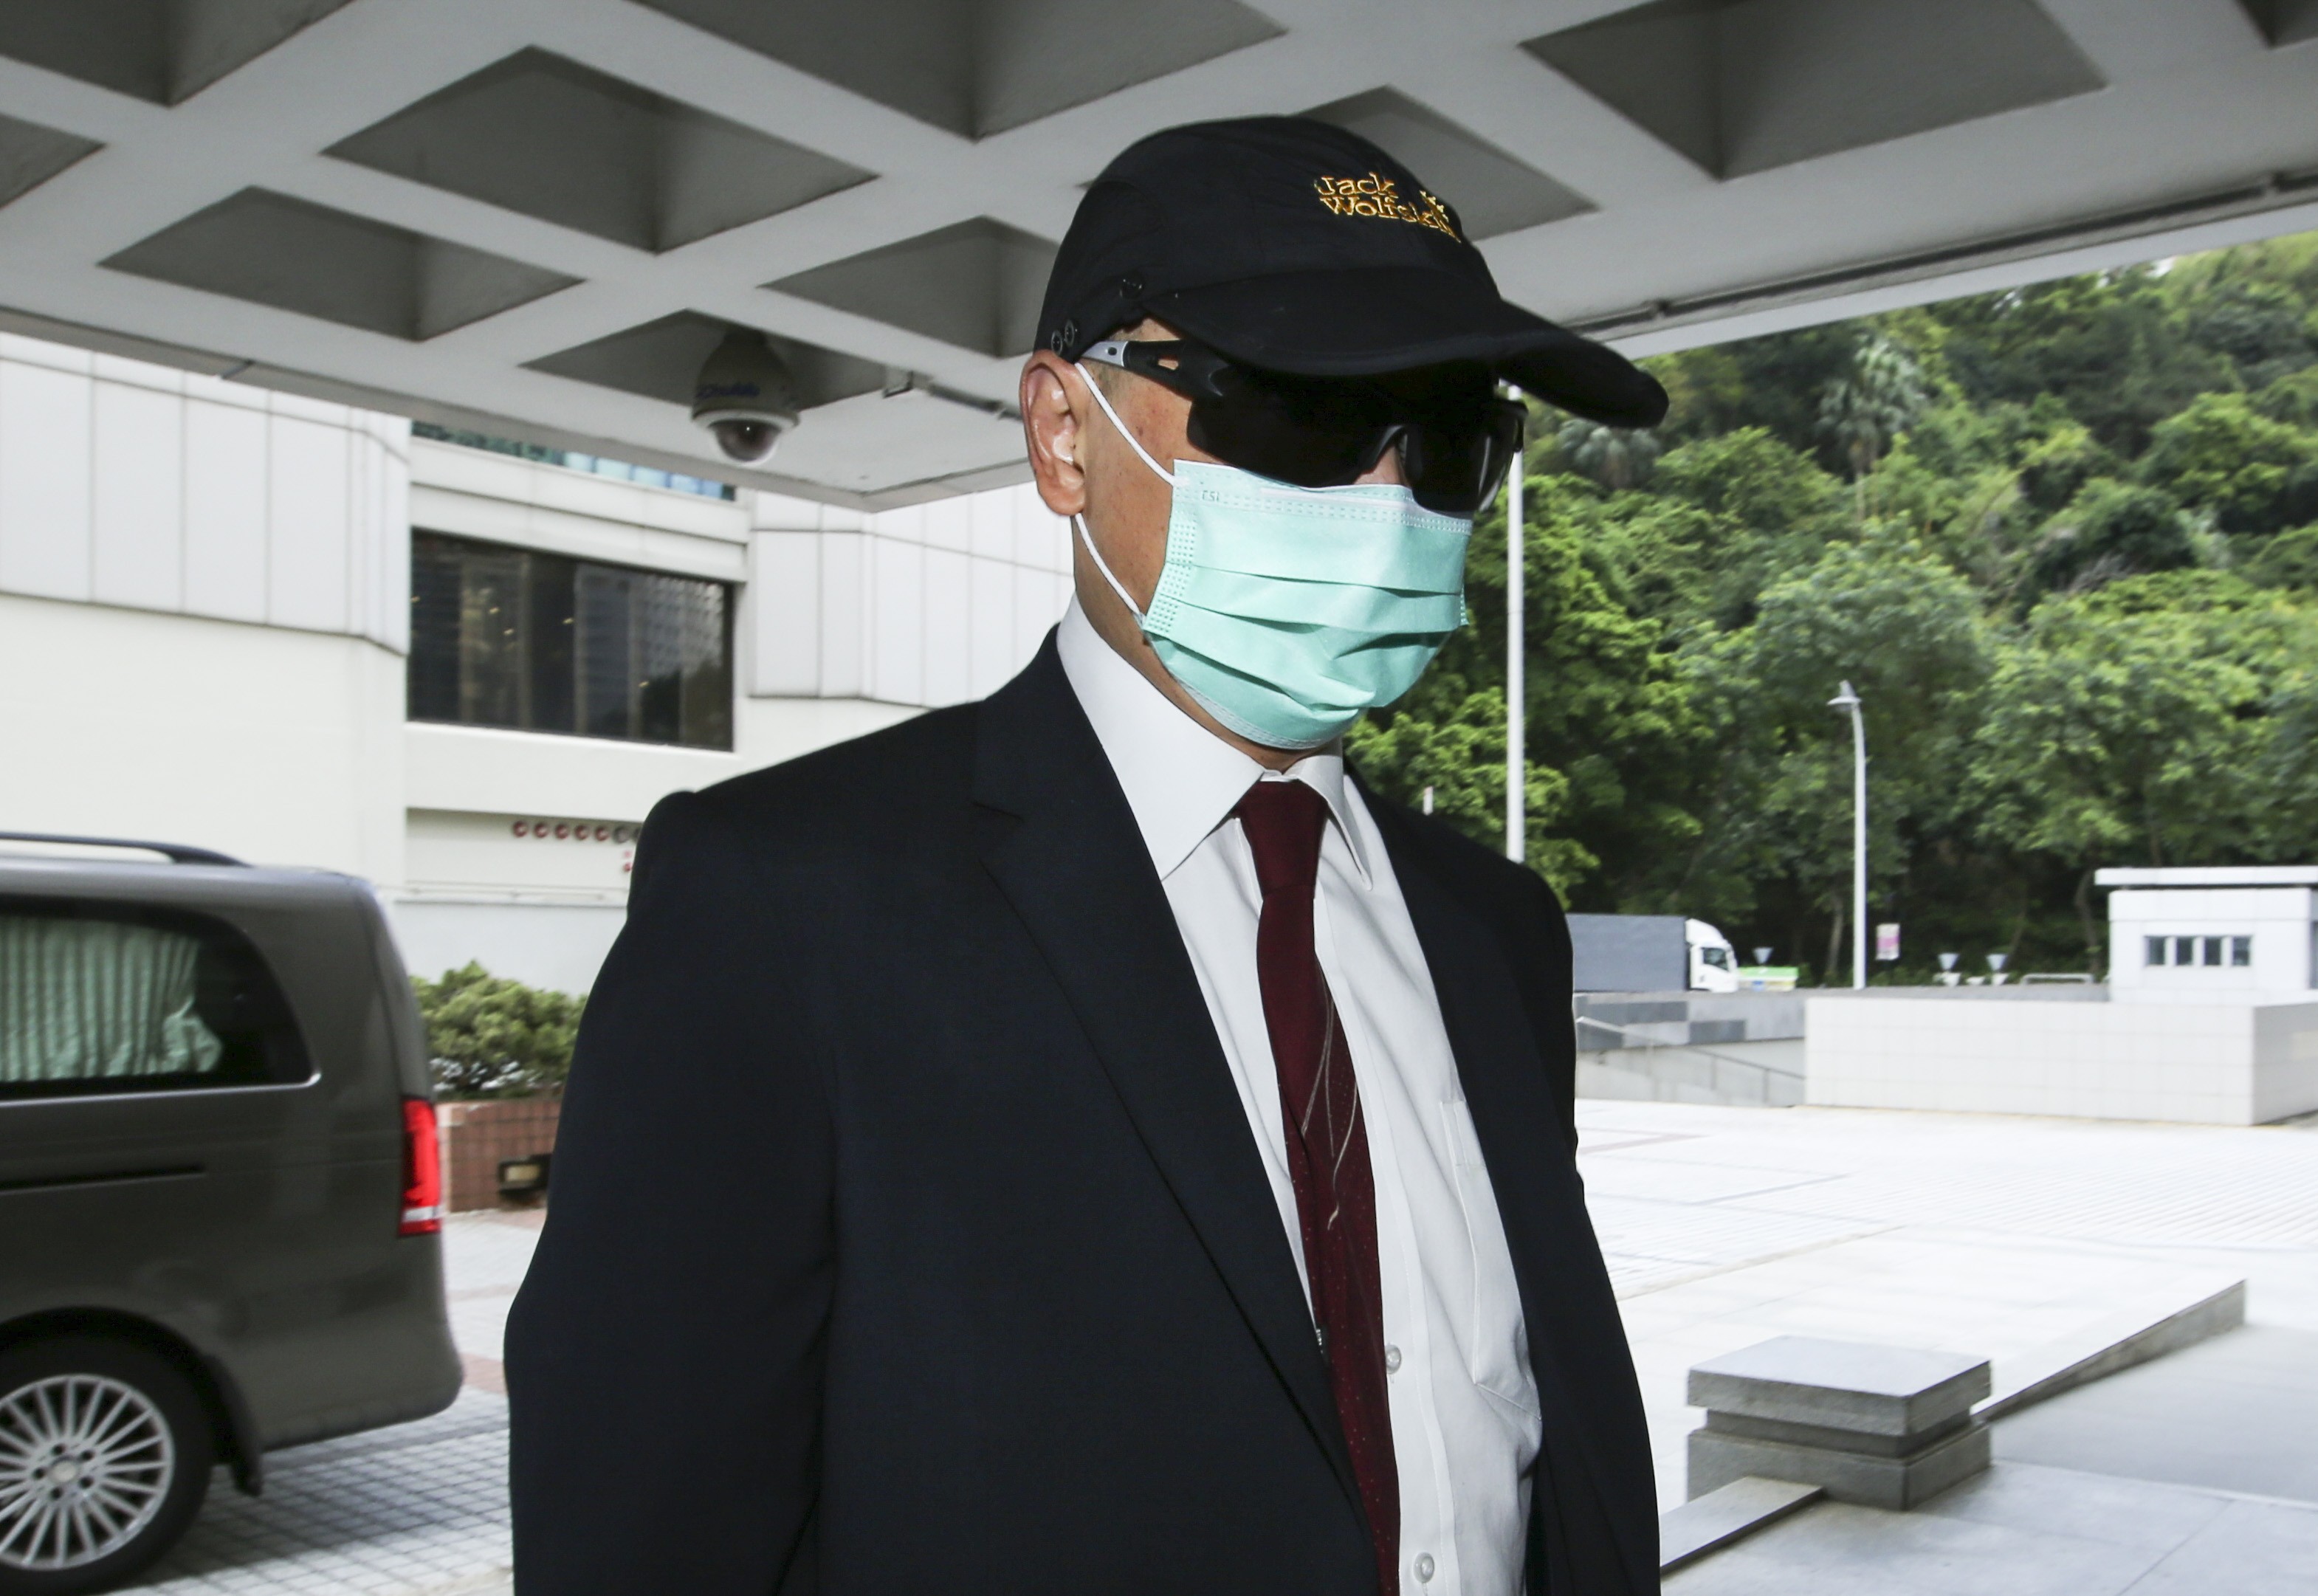 Dr Stephen Chow arrives at the High Court for his trial. Photo: Edmond So